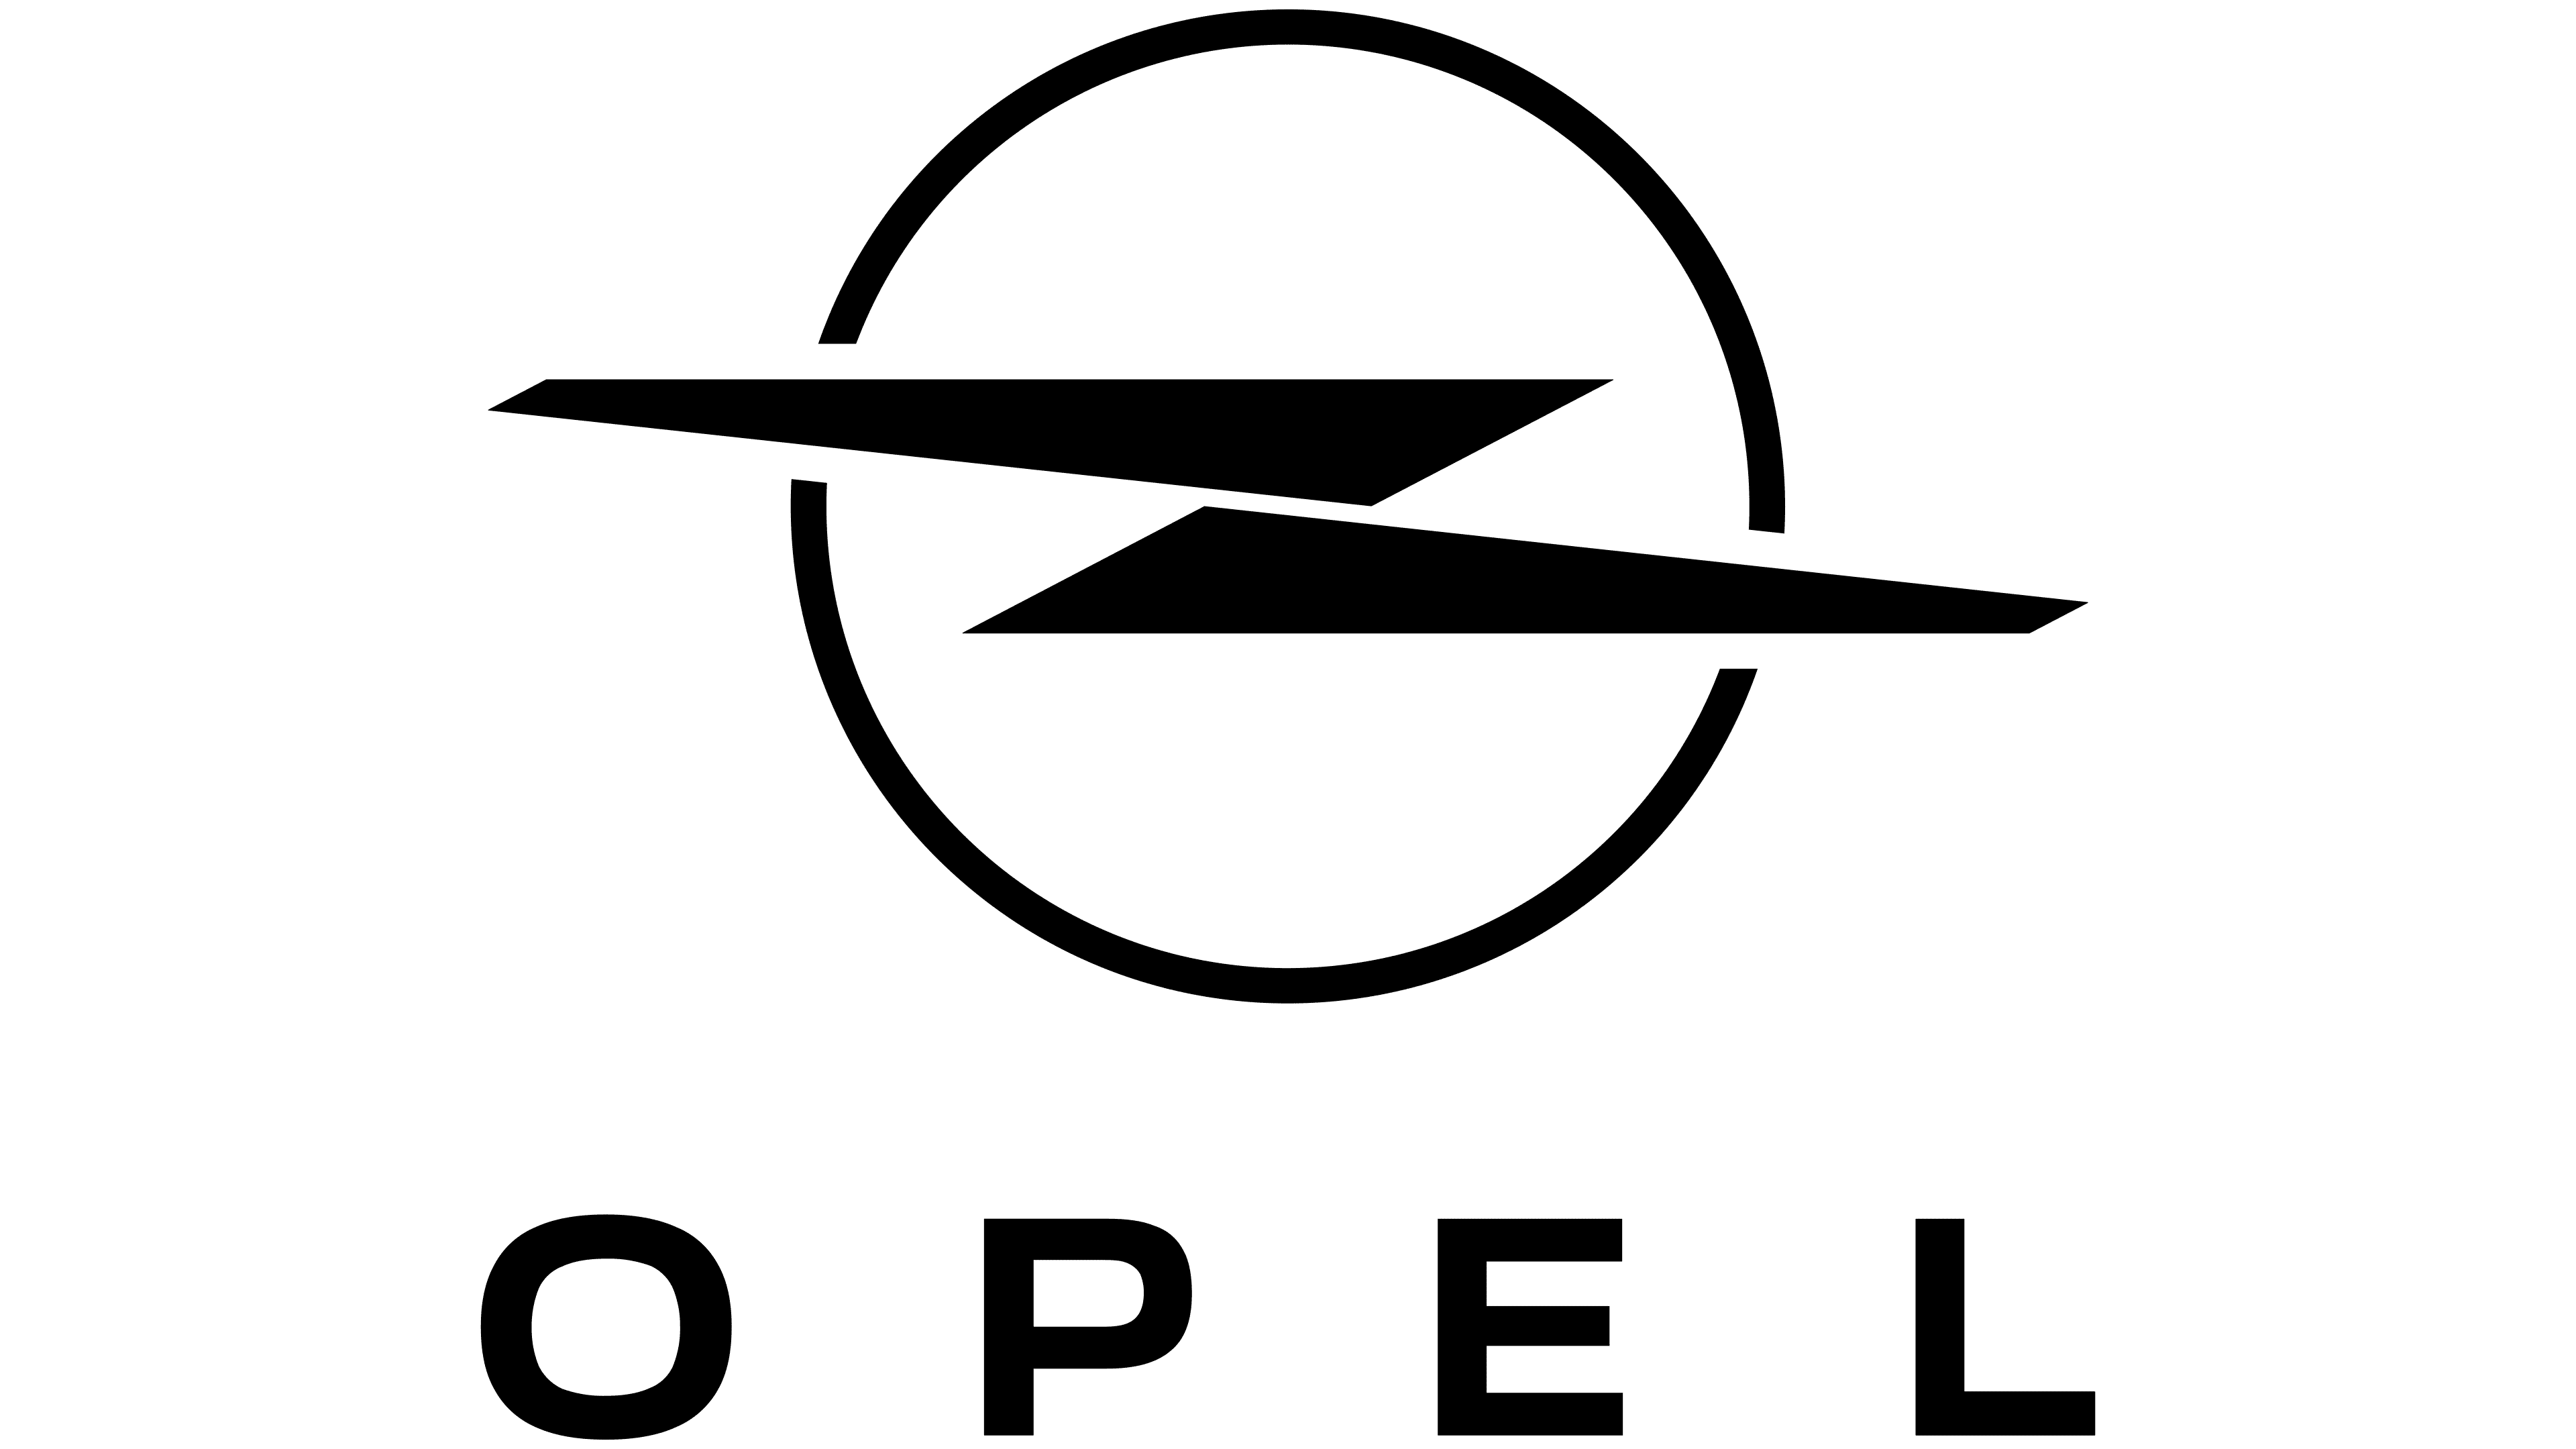 Logo Voiture : Marque Opel | Format HD Png Dessin